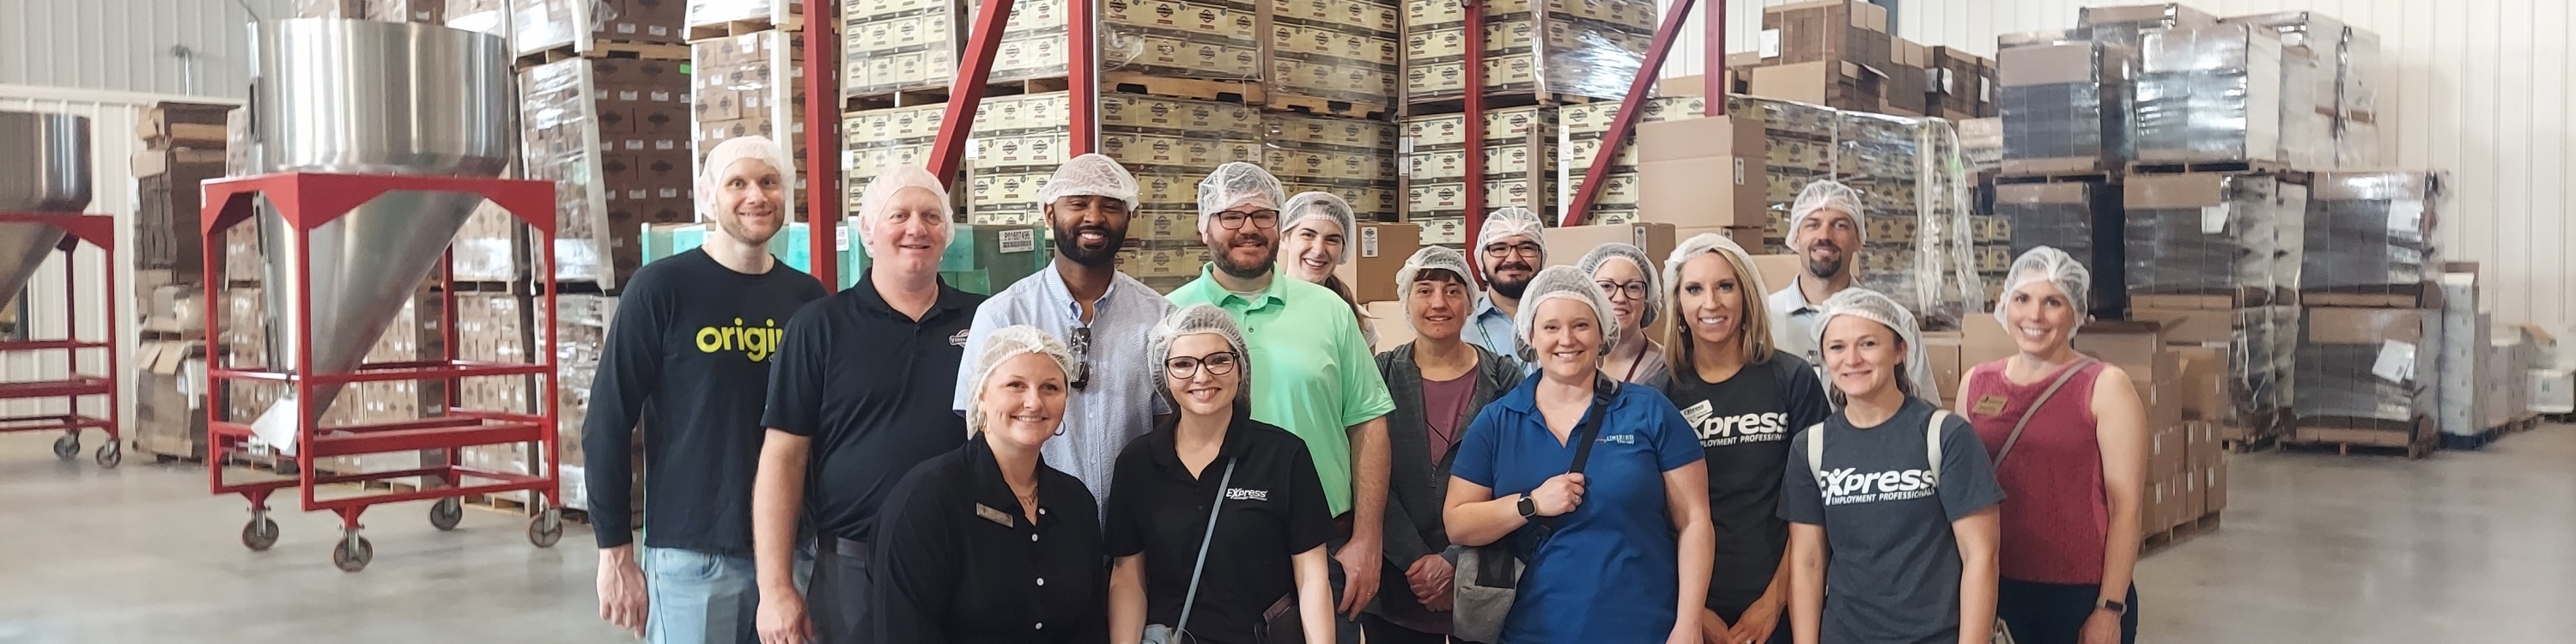 group of people in hairnets in front of stacked boxes of coffee.